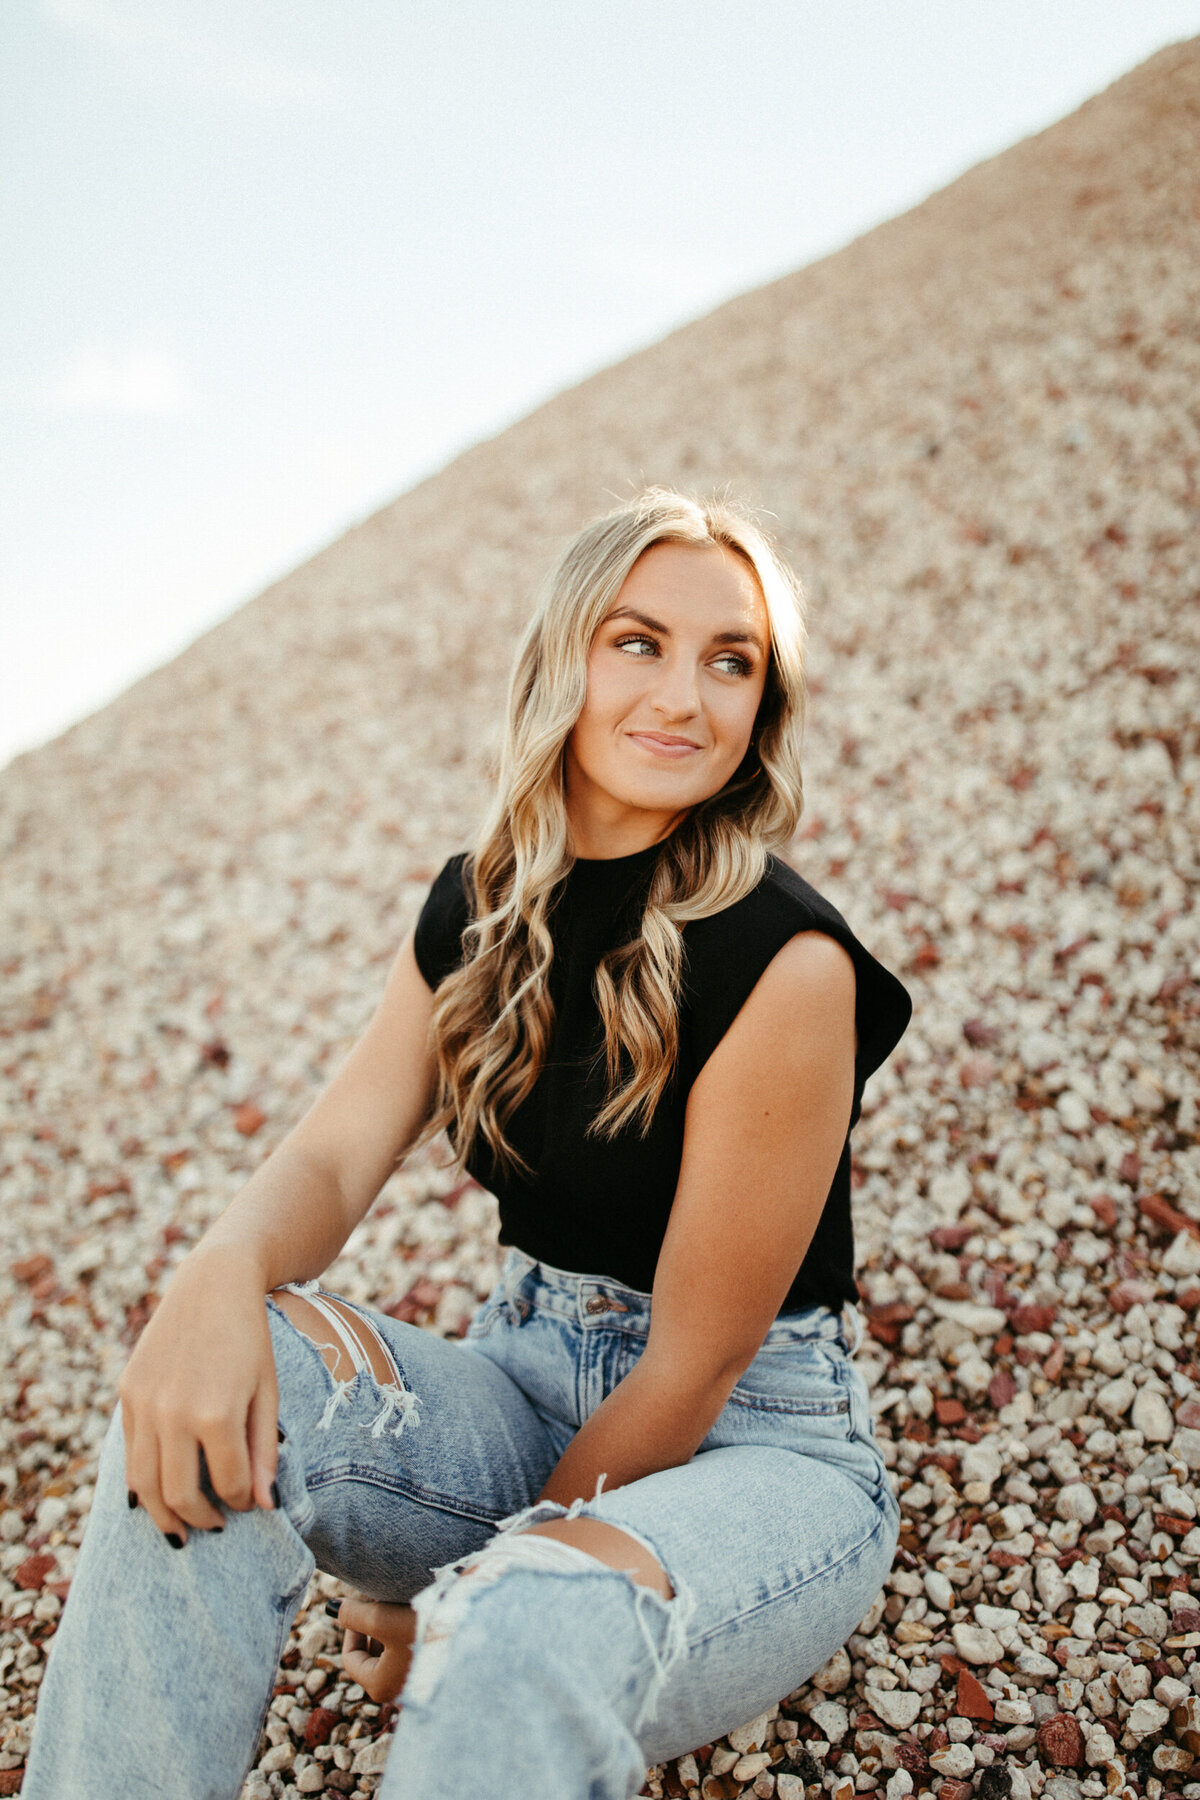 Girl senior wearing black shirt and blue jeans sitting down and posing at gravel pit